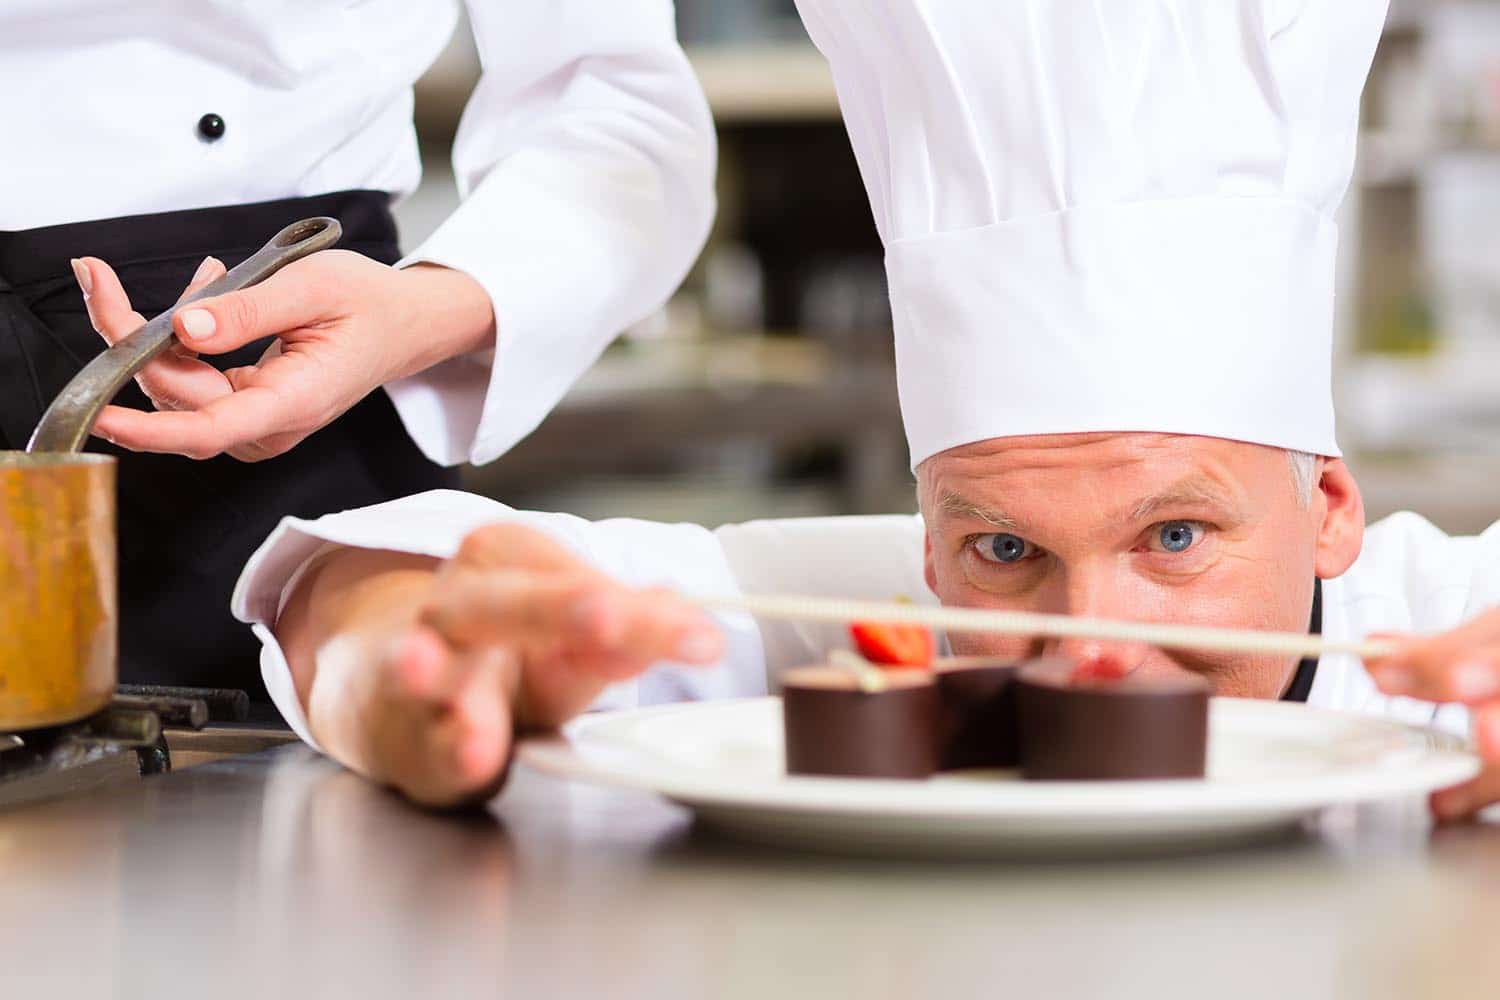 HOW TO BECOME A PASTRY CHEF?